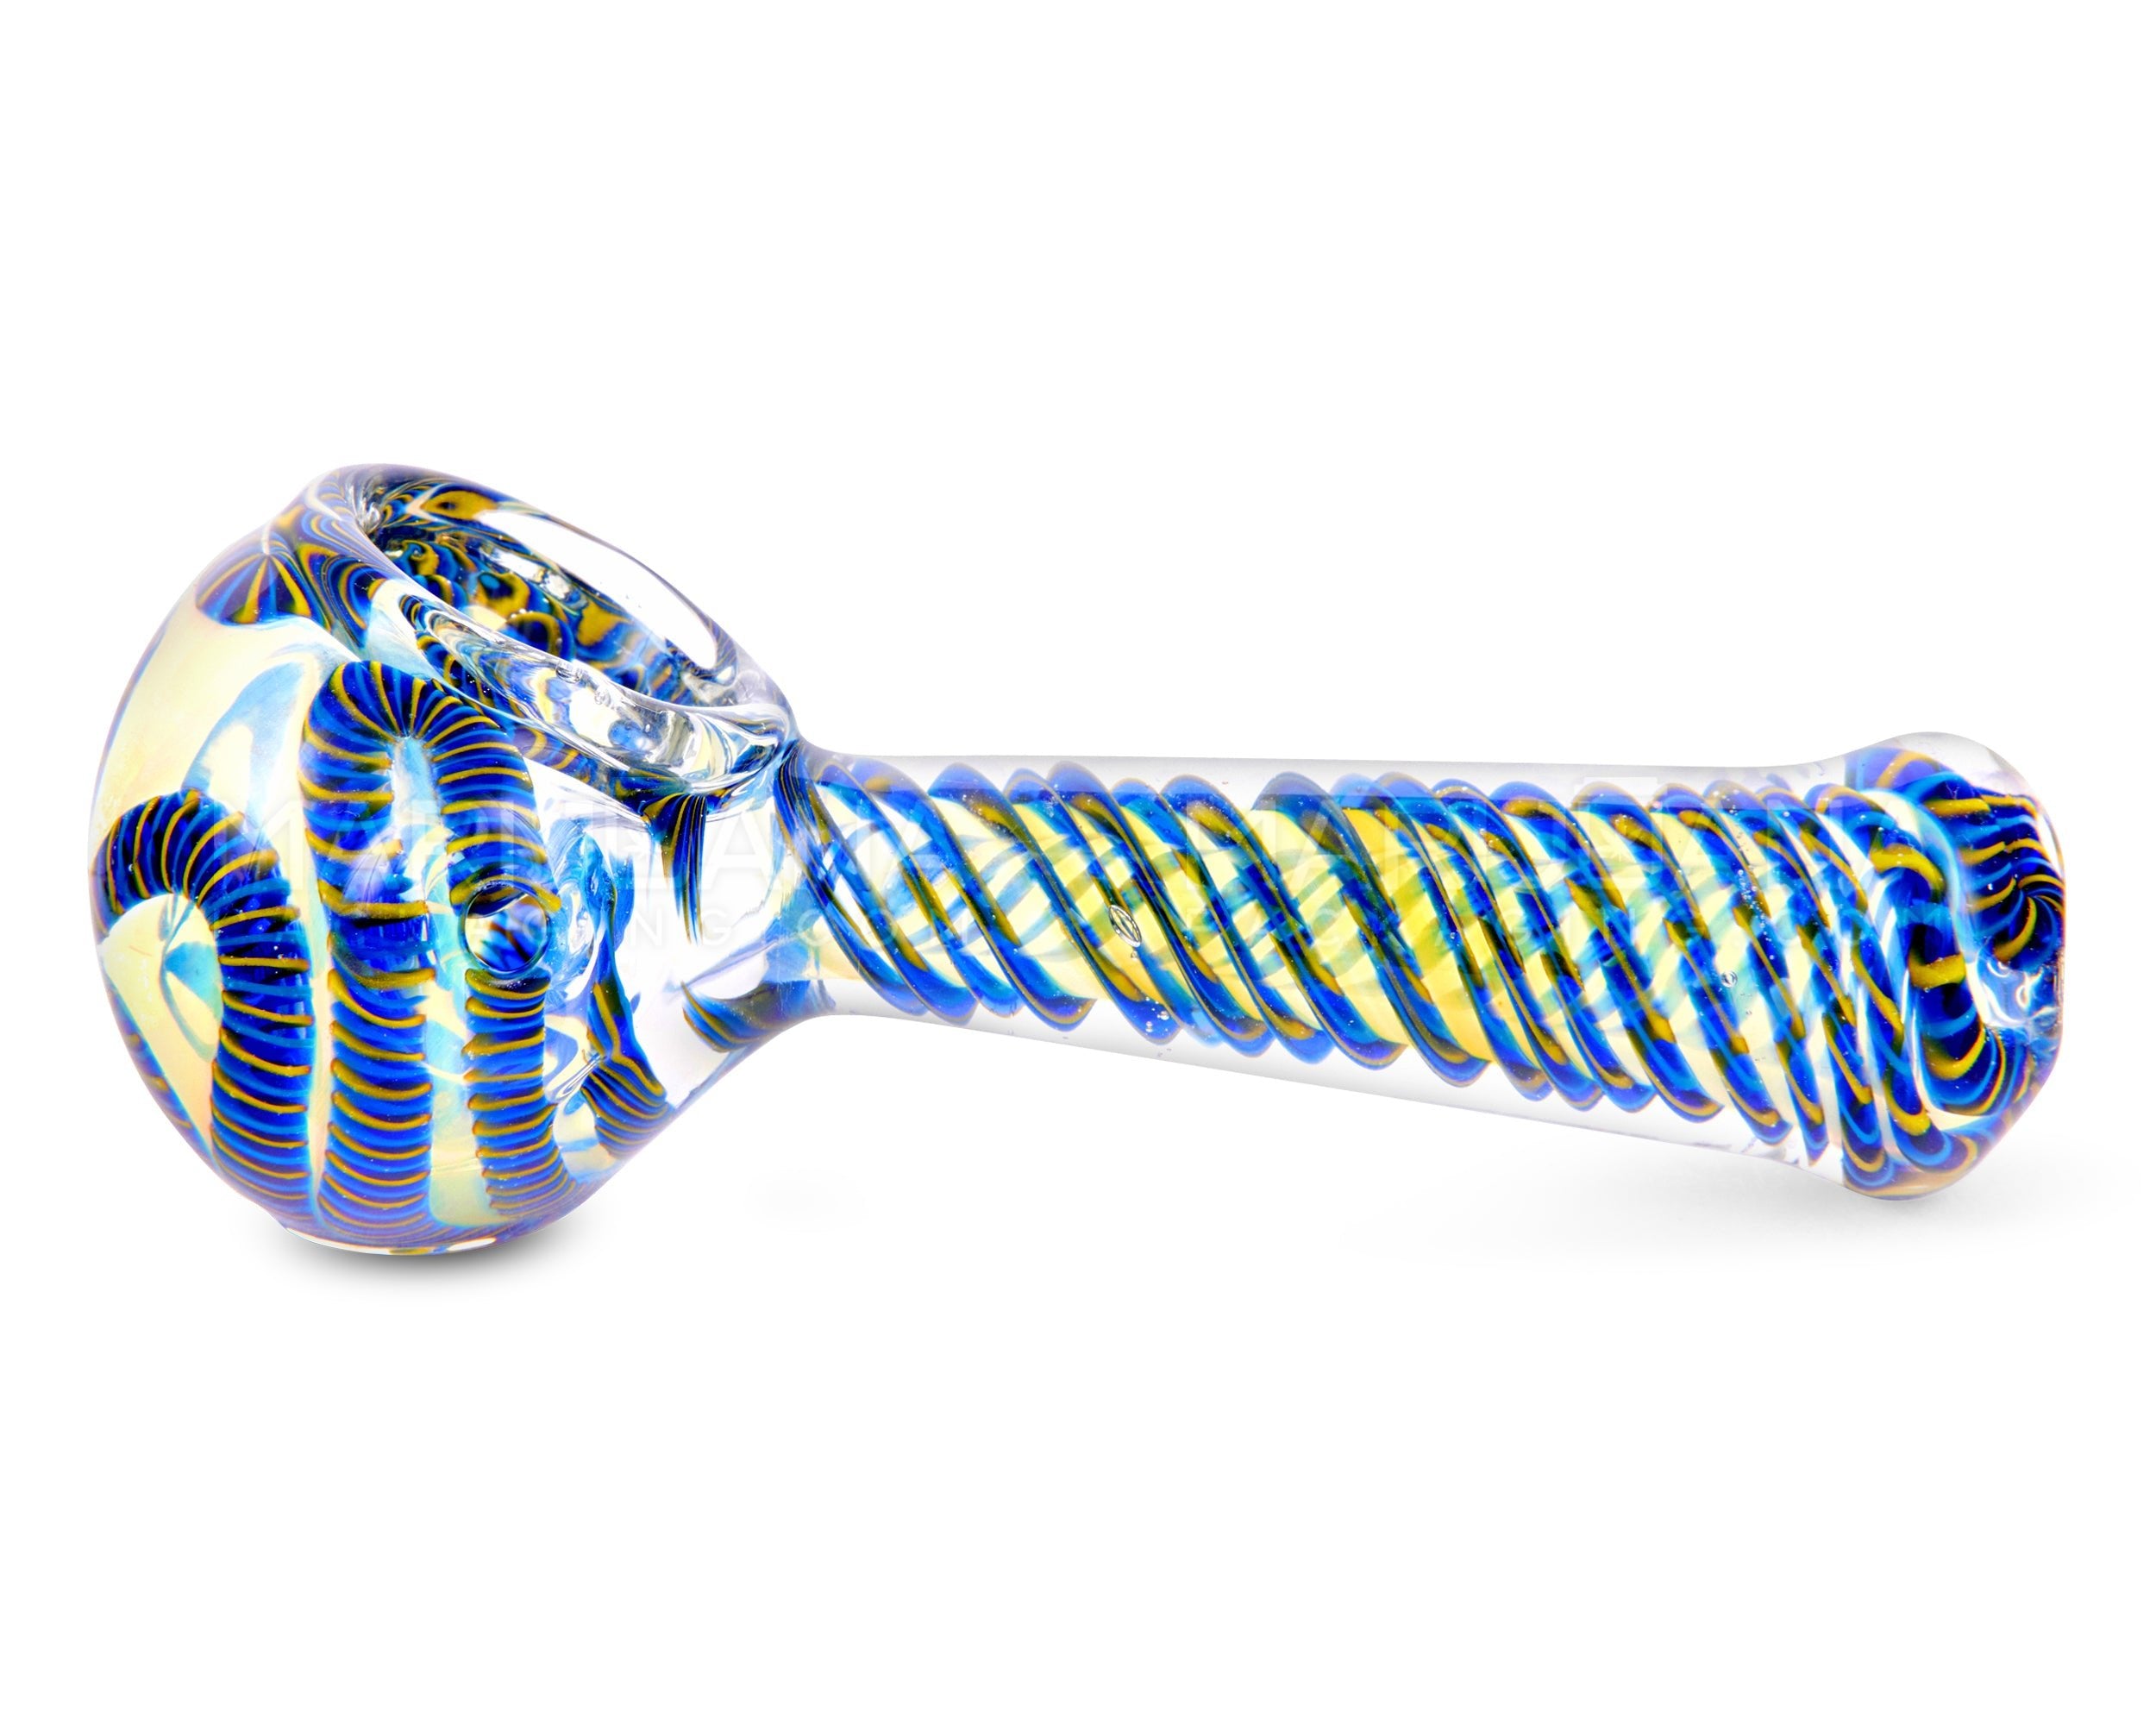 Spiral & Blue Fumed Spoon Hand Pipe w/ Ribboning | 5in Long - Glass - Assorted - 5